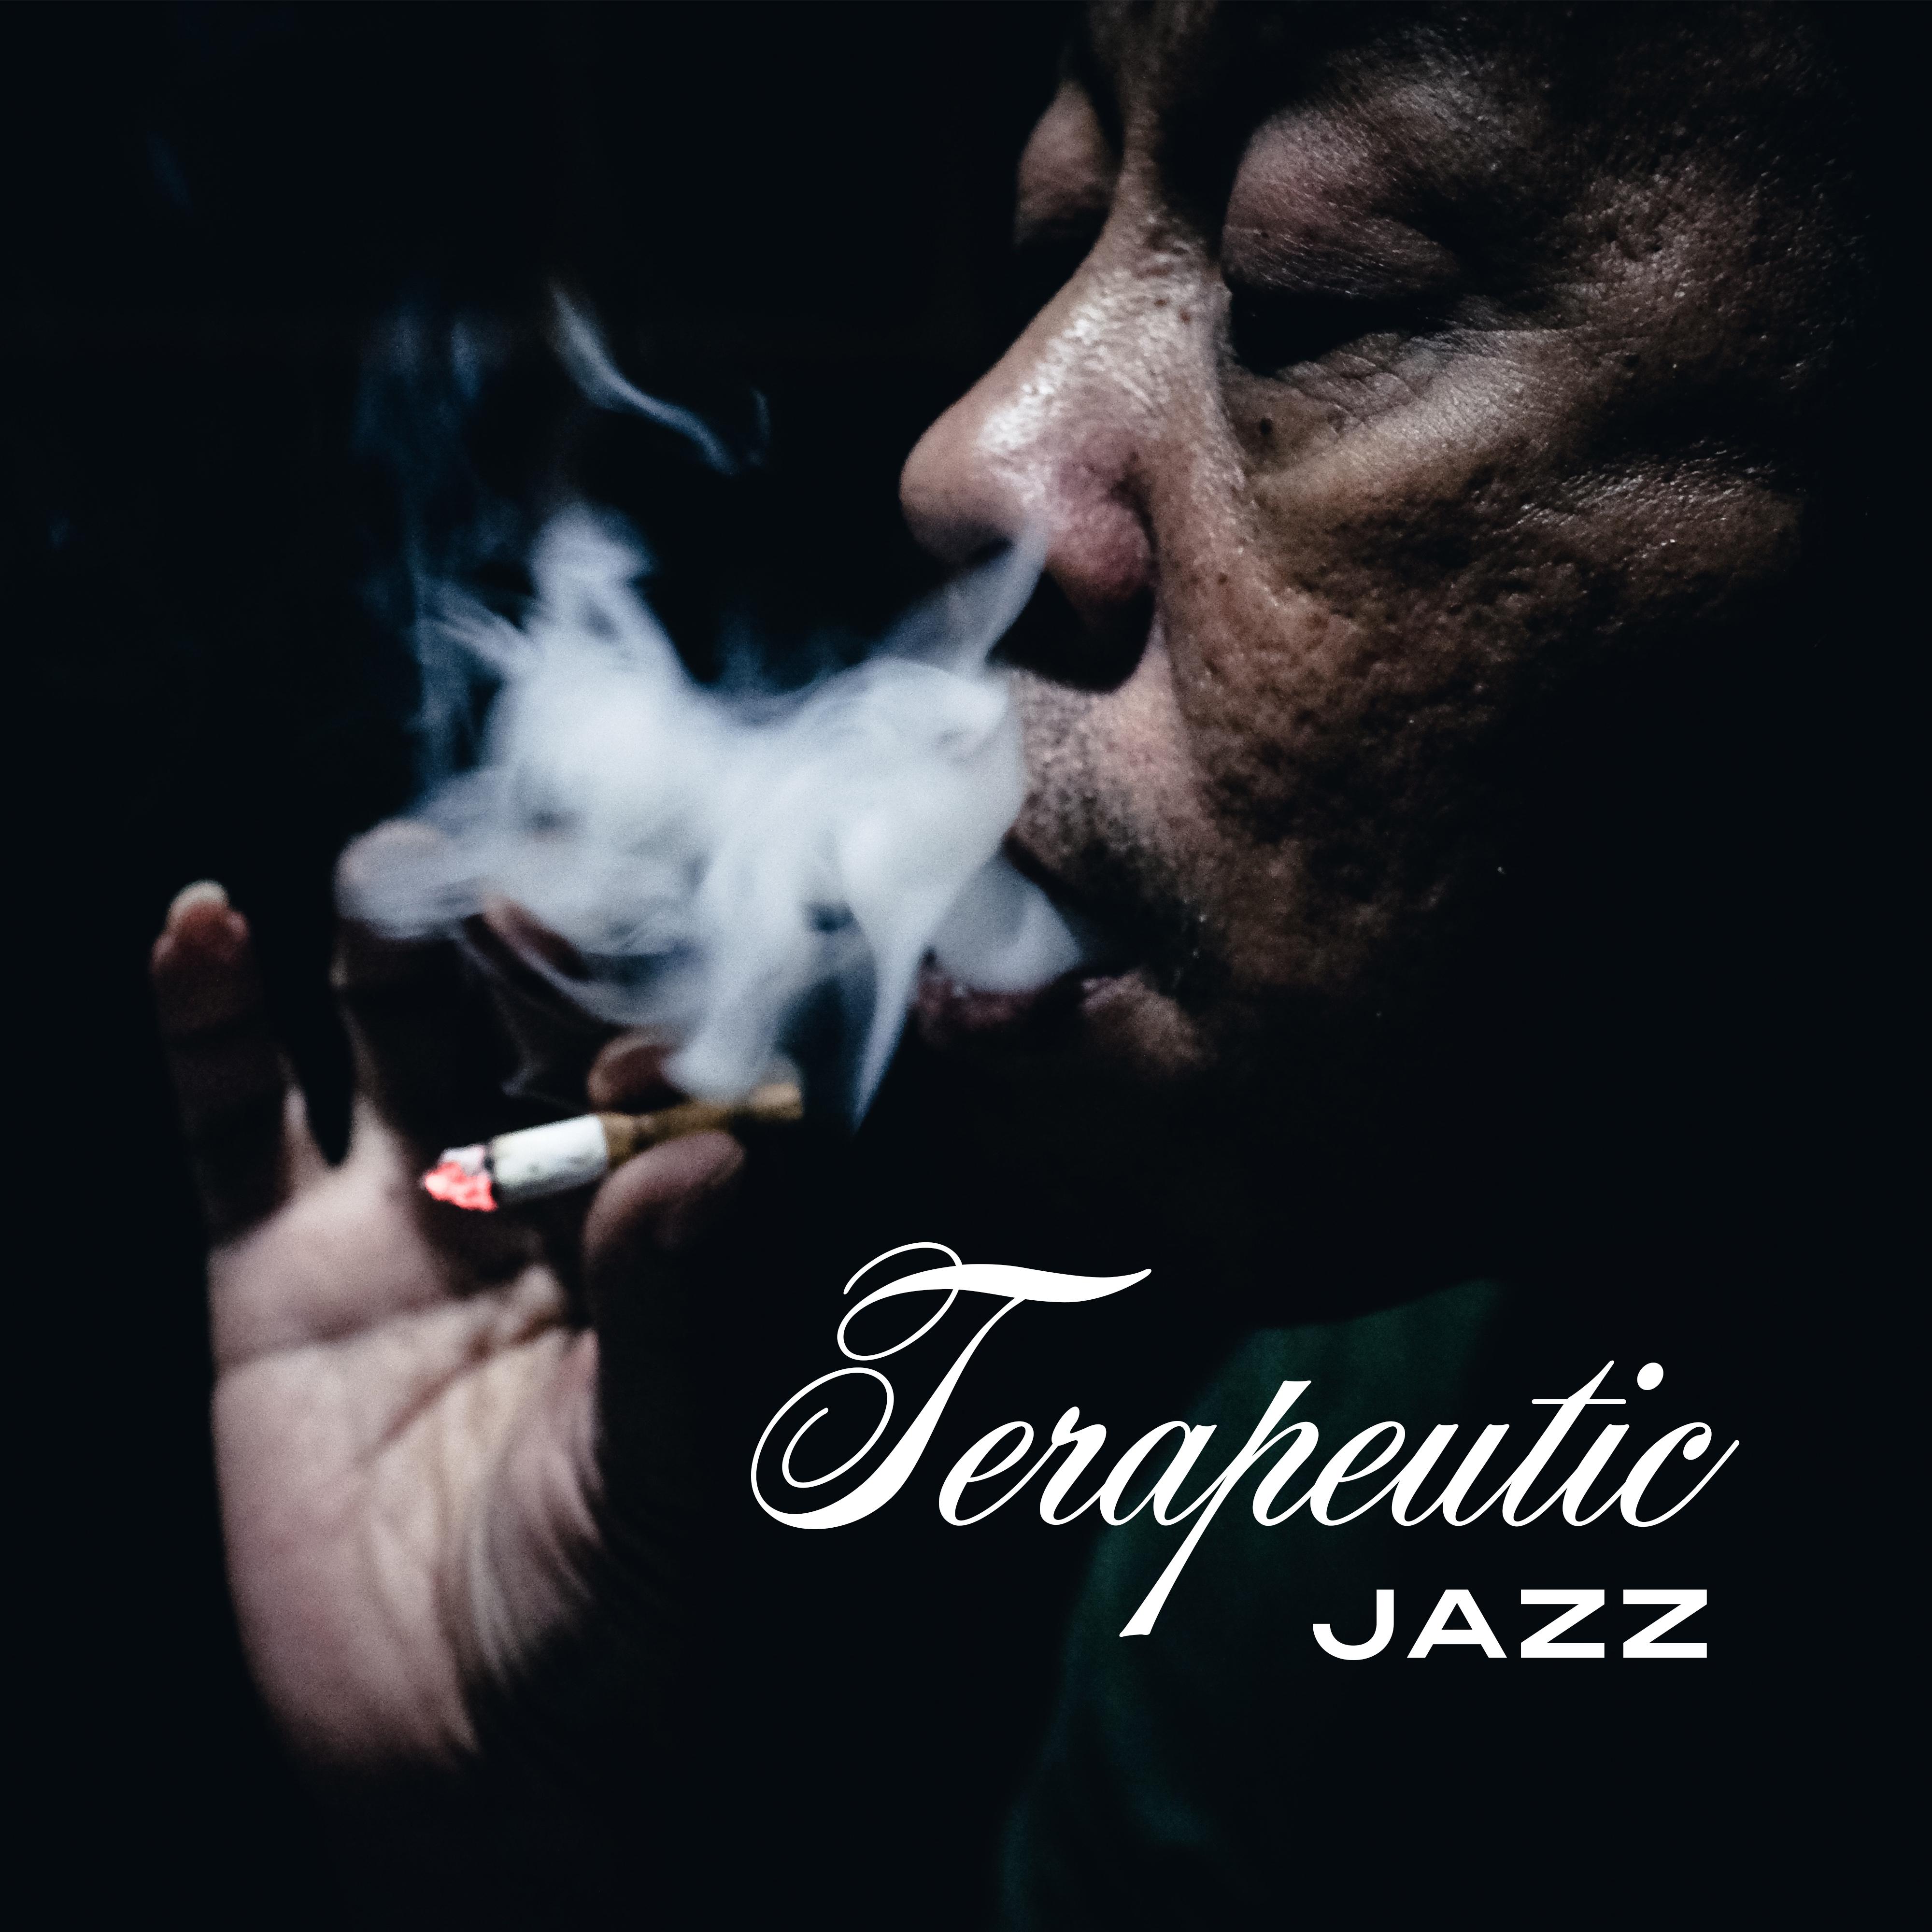 Terapeutic Jazz  Pure Relaxation, Stress Relief, Guitar Vibes, Ambient Music, Gentle Piano, Therapy Sounds, Lounge Jazz